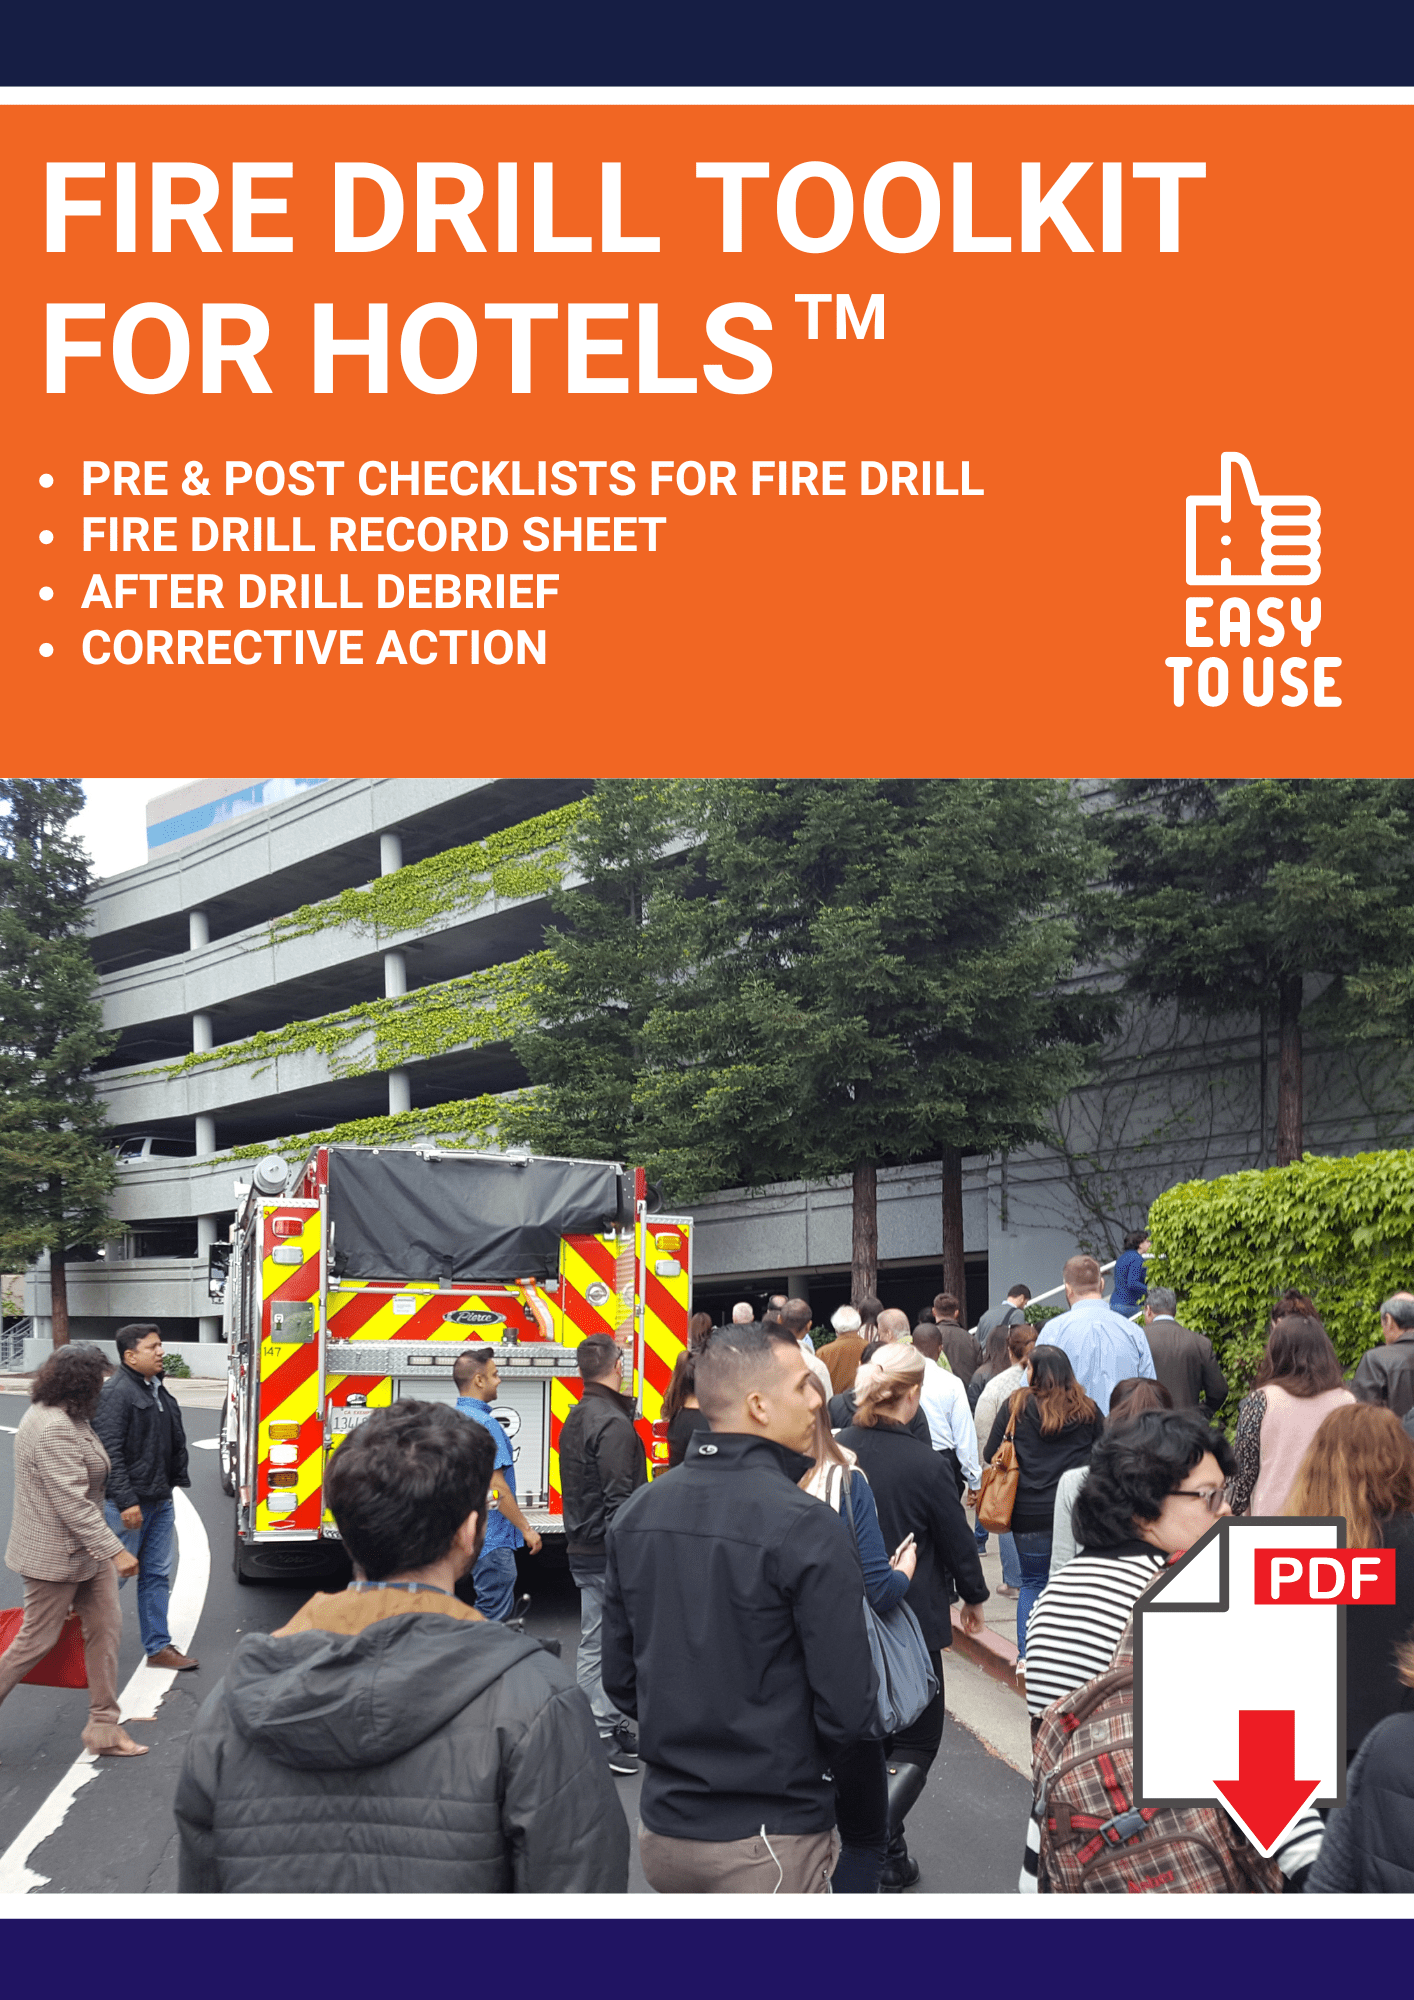 Fire Drill Toolkit for hotels booklet